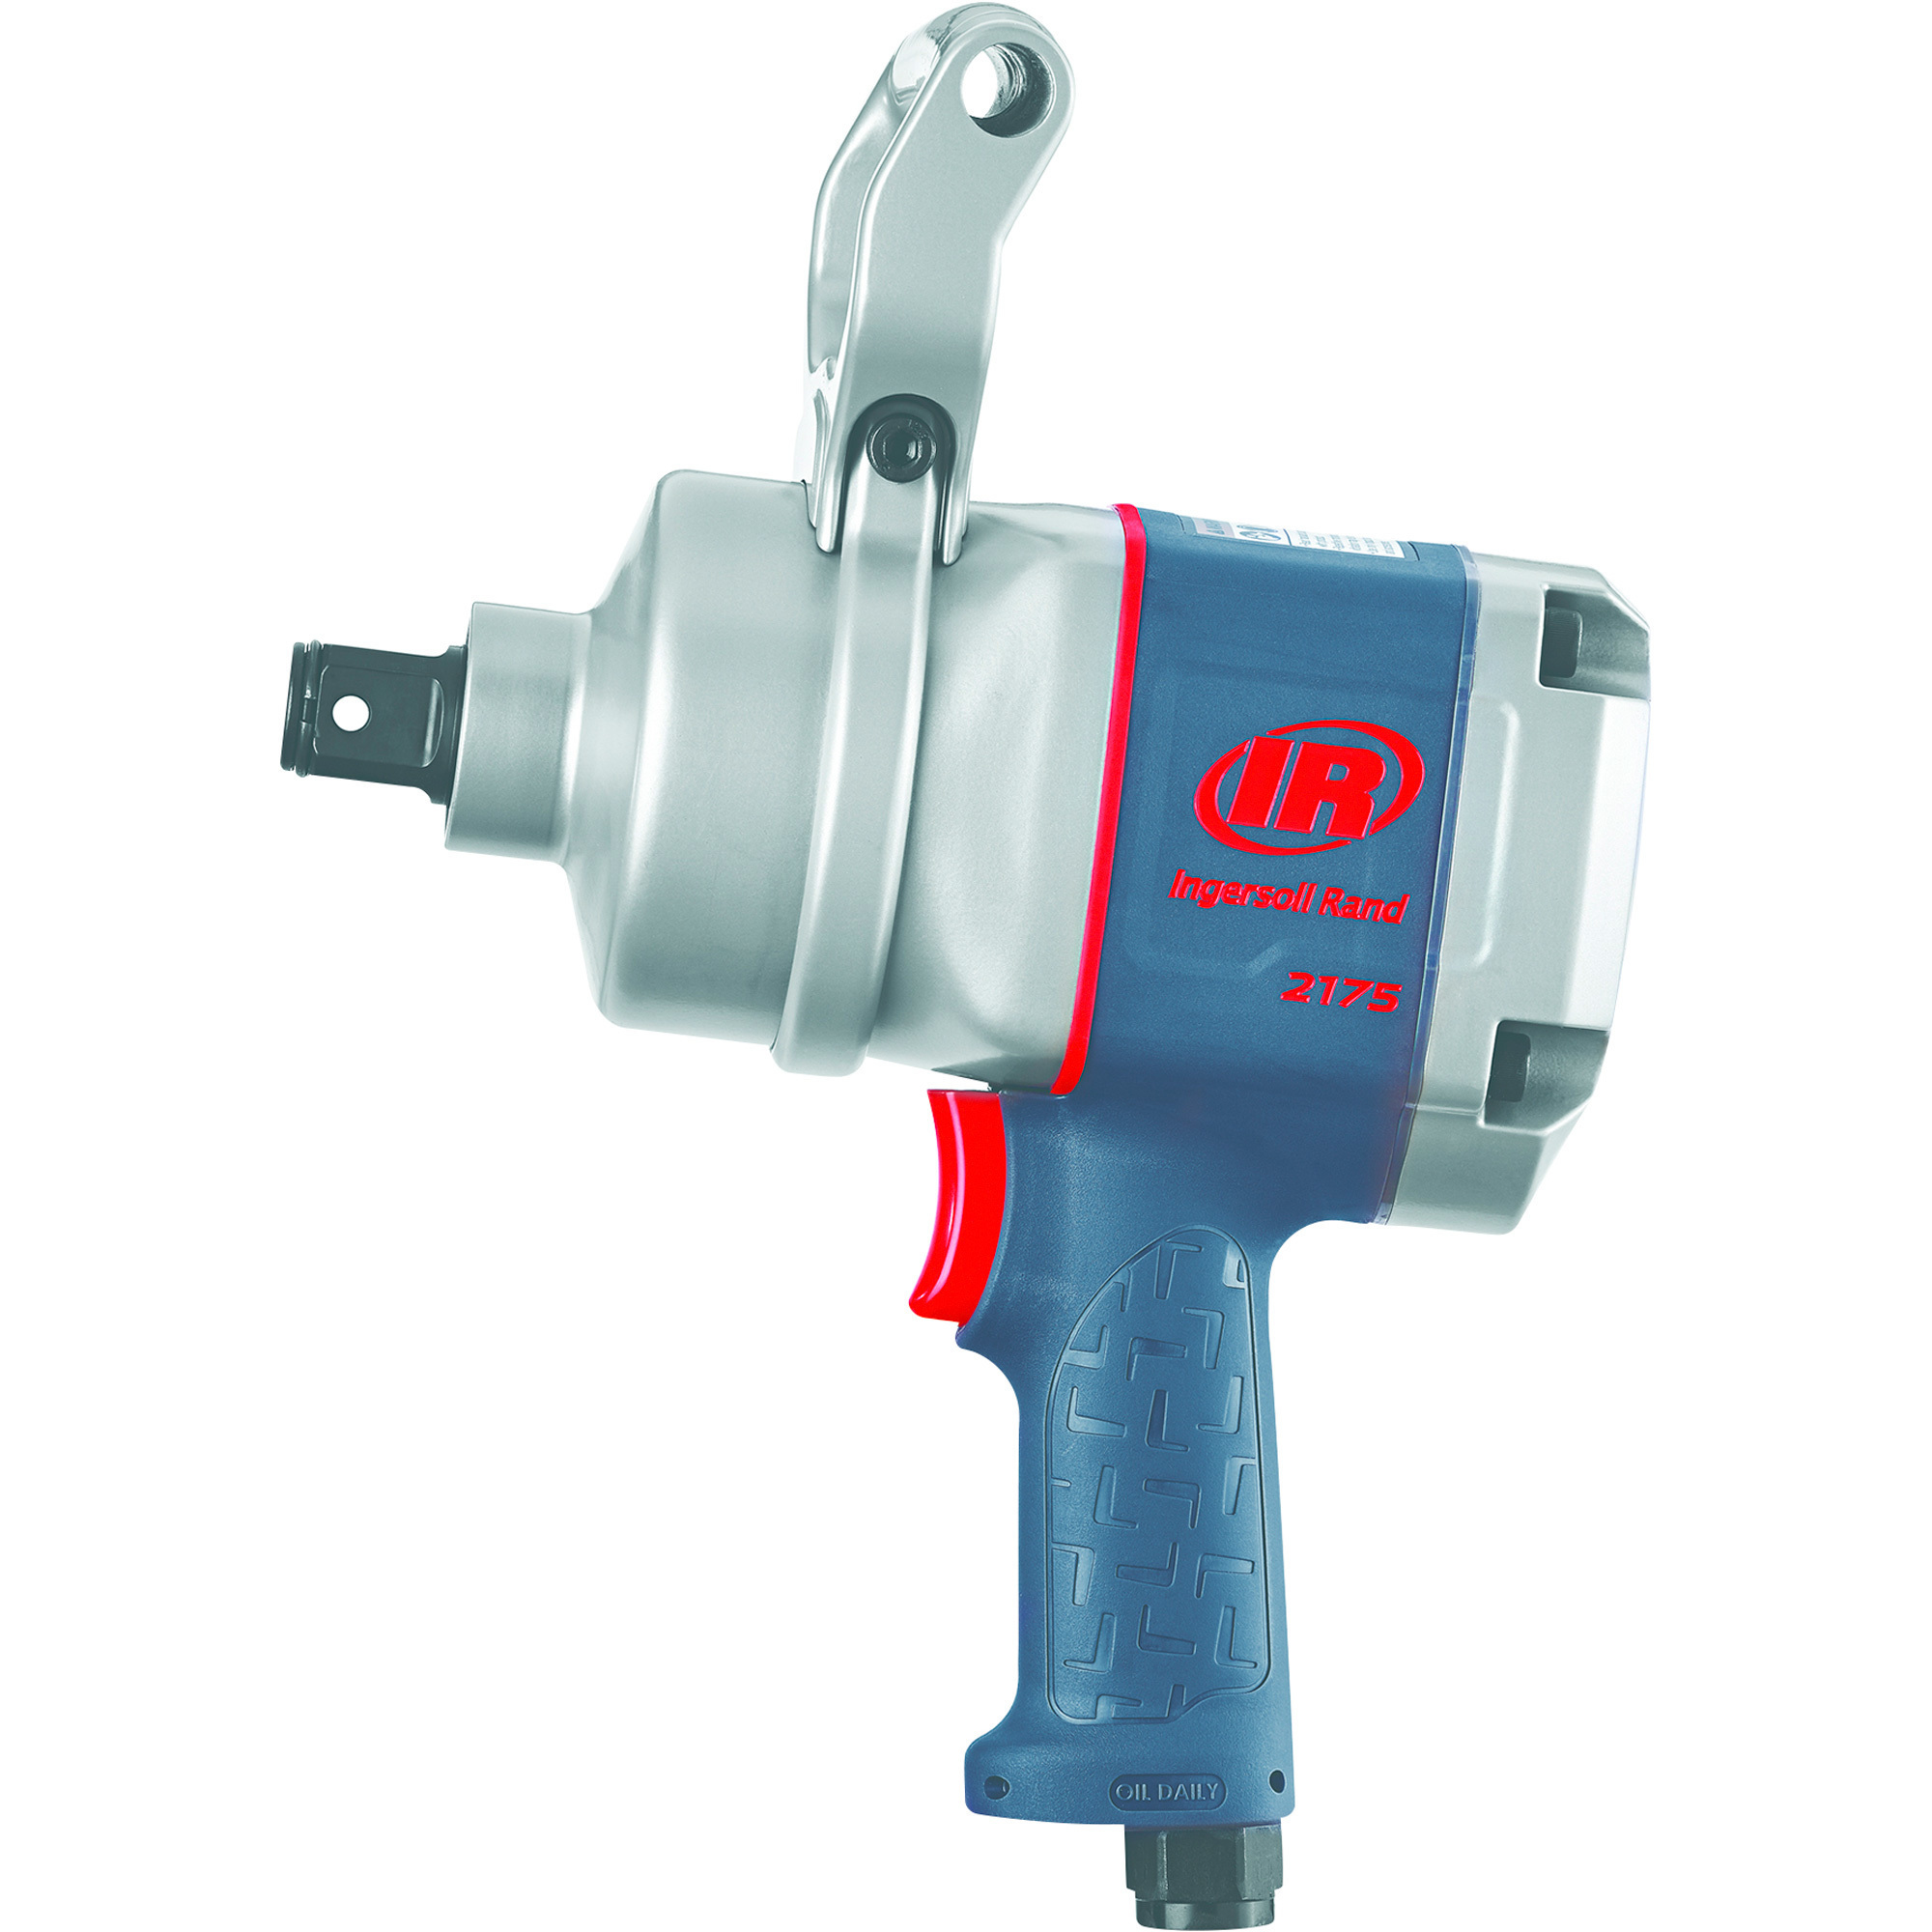 Ingersoll Rand Pistol Grip Air Impact Wrench, 1Inch Drive, 2000 Ft./Lbs. Torque, Model 2175MAX